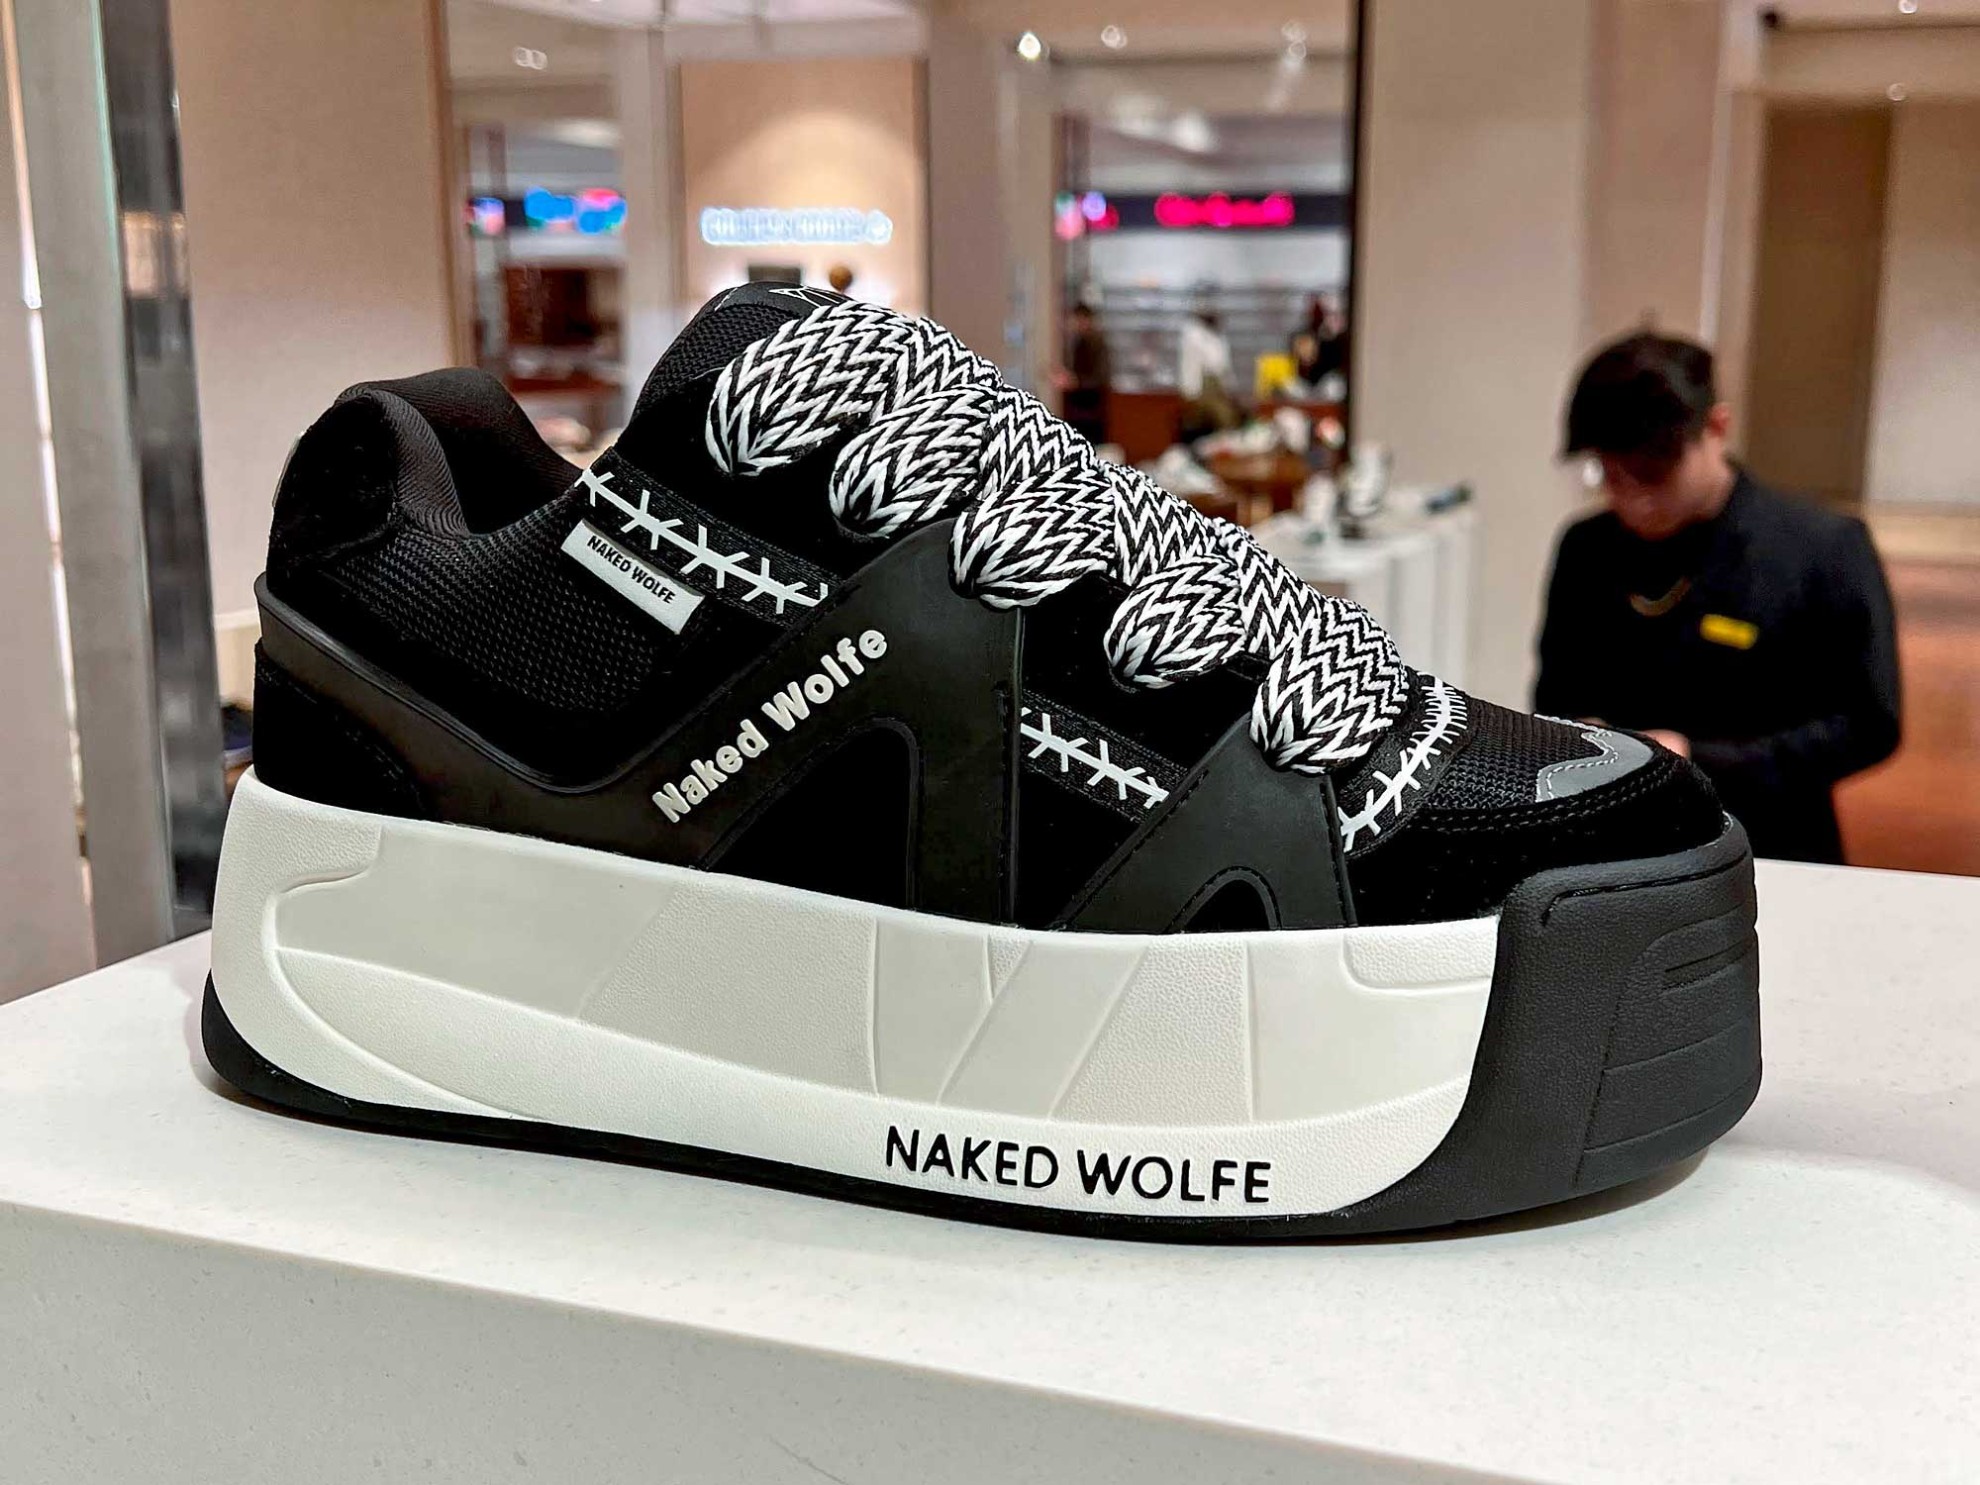 Is the trend of skate sneakers making a comeback? More powerful, attractive and overelaborate